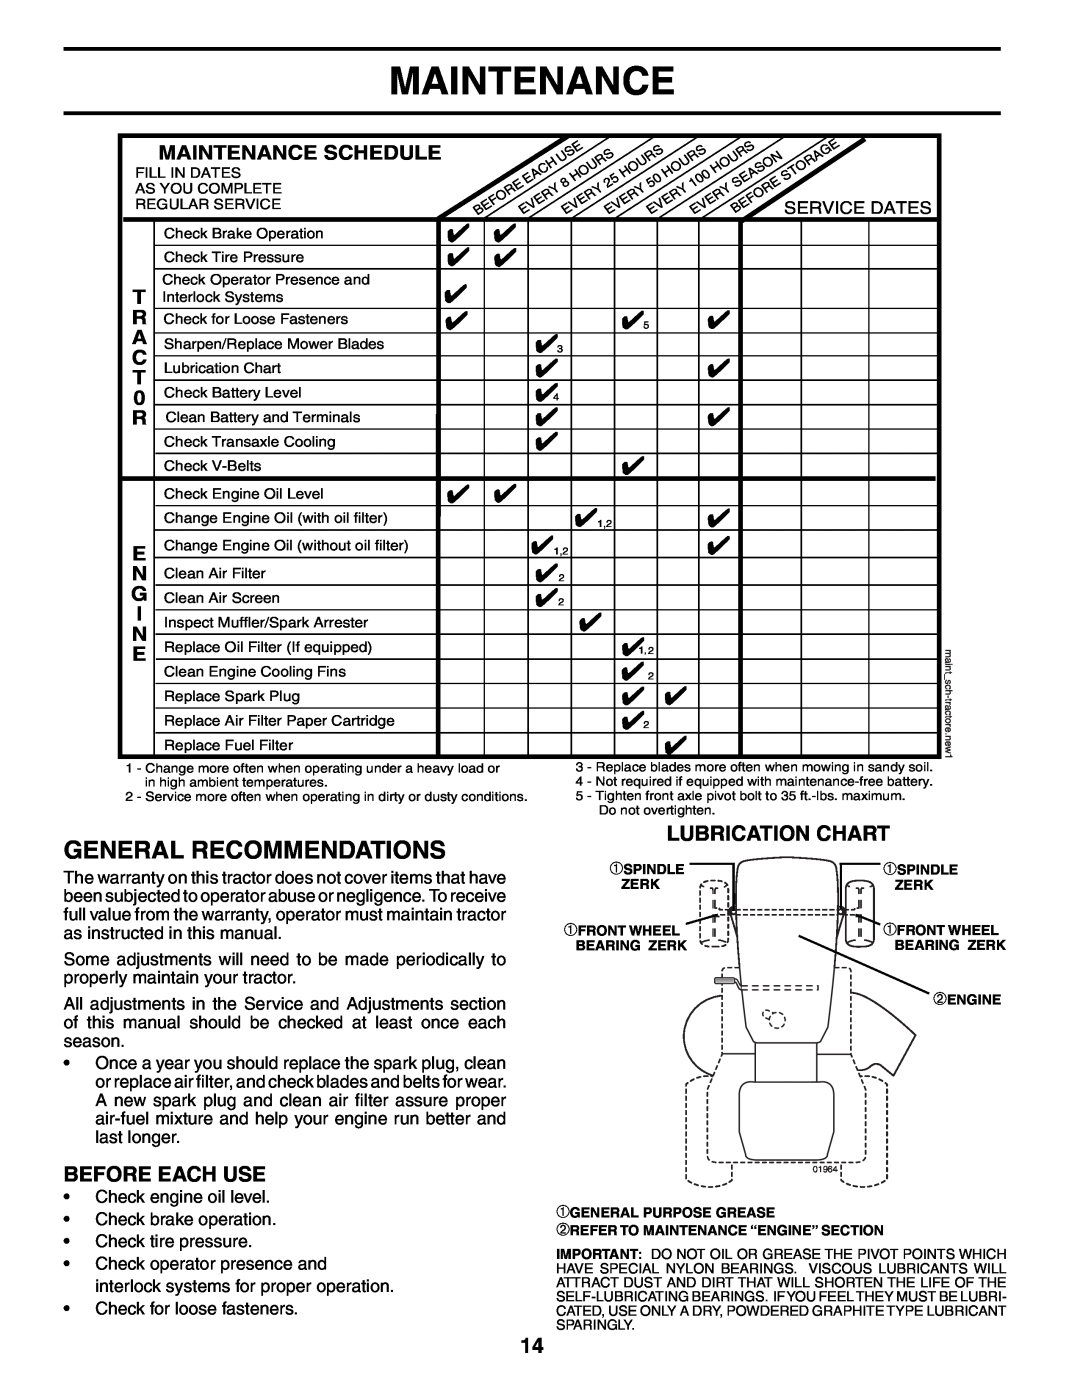 Weed Eater 187637 manual General Recommendations, Lubrication Chart, Before Each Use, Maintenance Schedule 